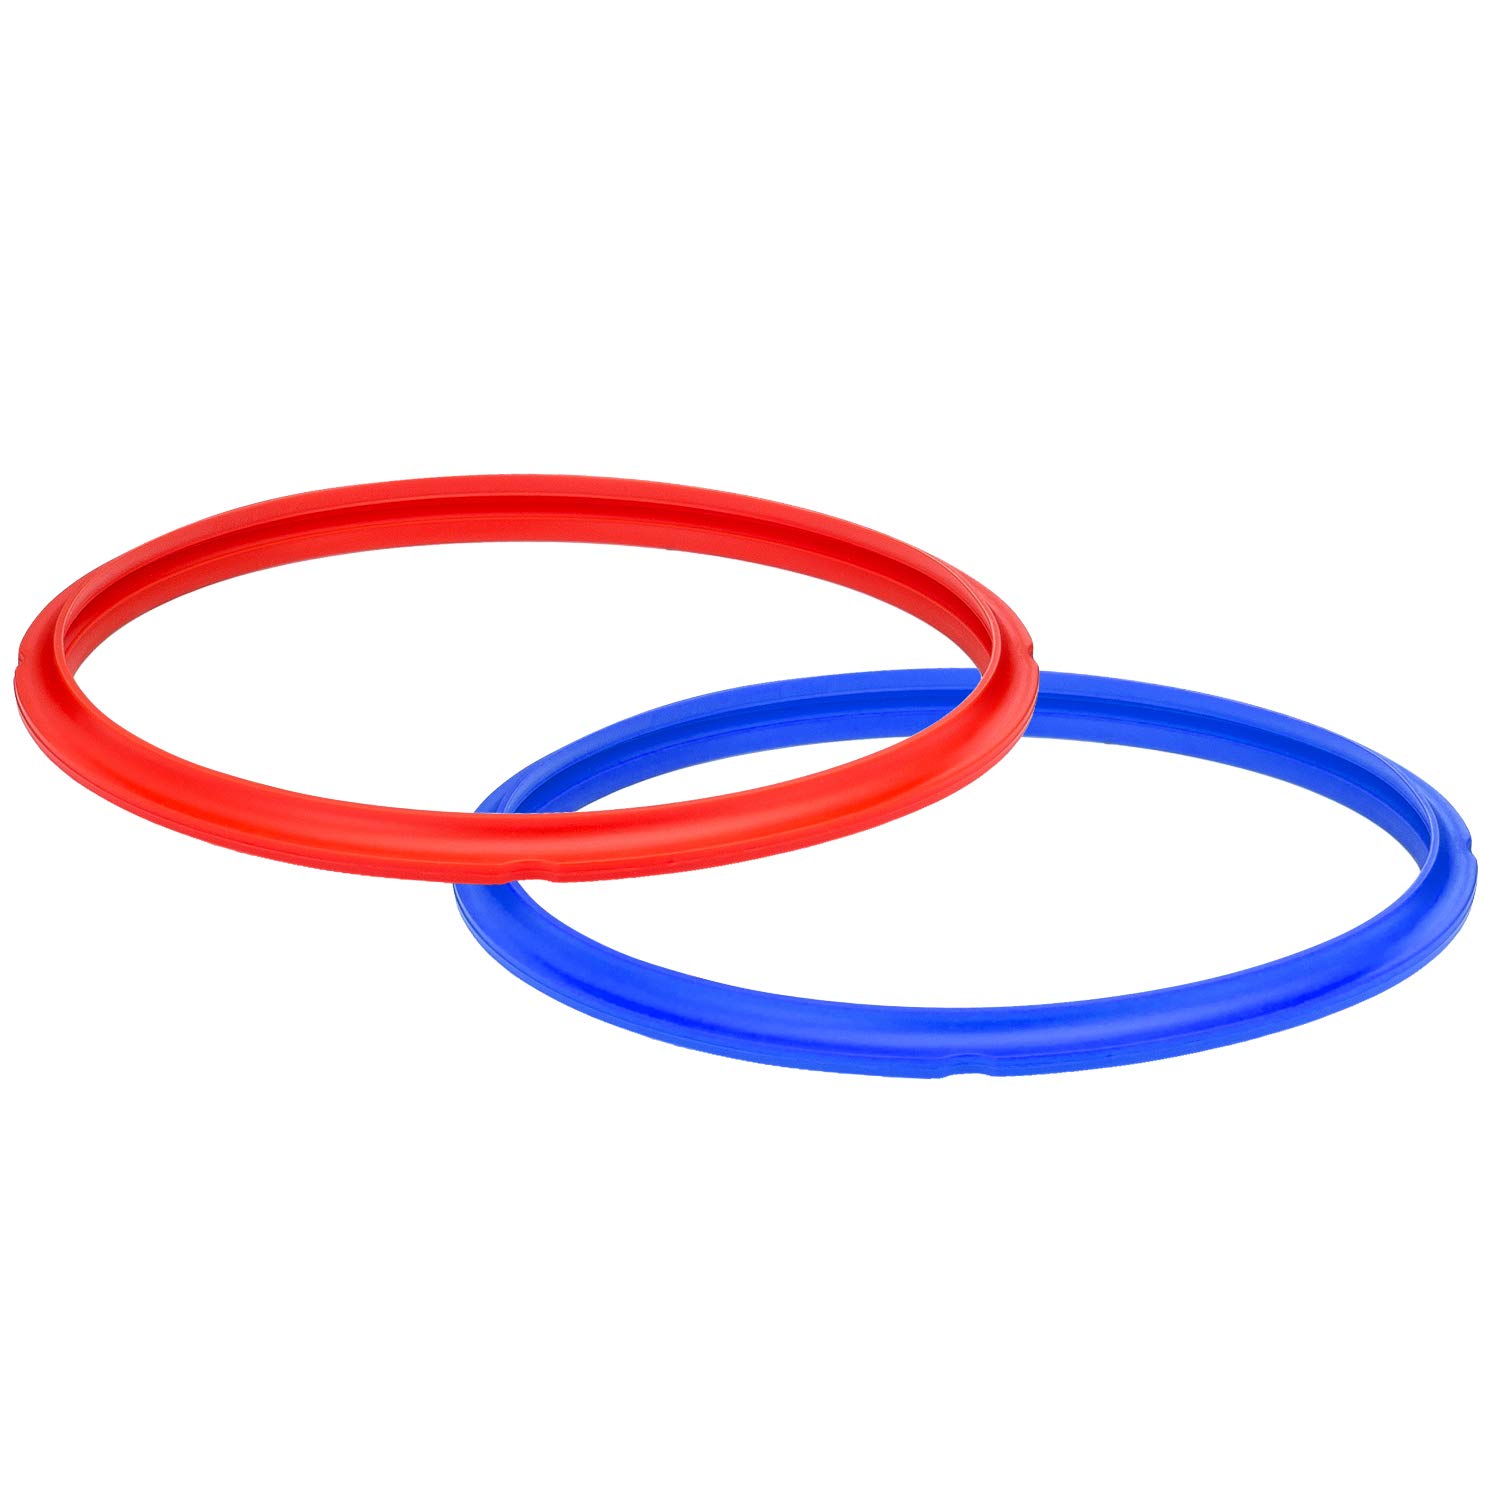 Instant Pot Sealing Rings 2-Pack Red/Blue, 8 Quart